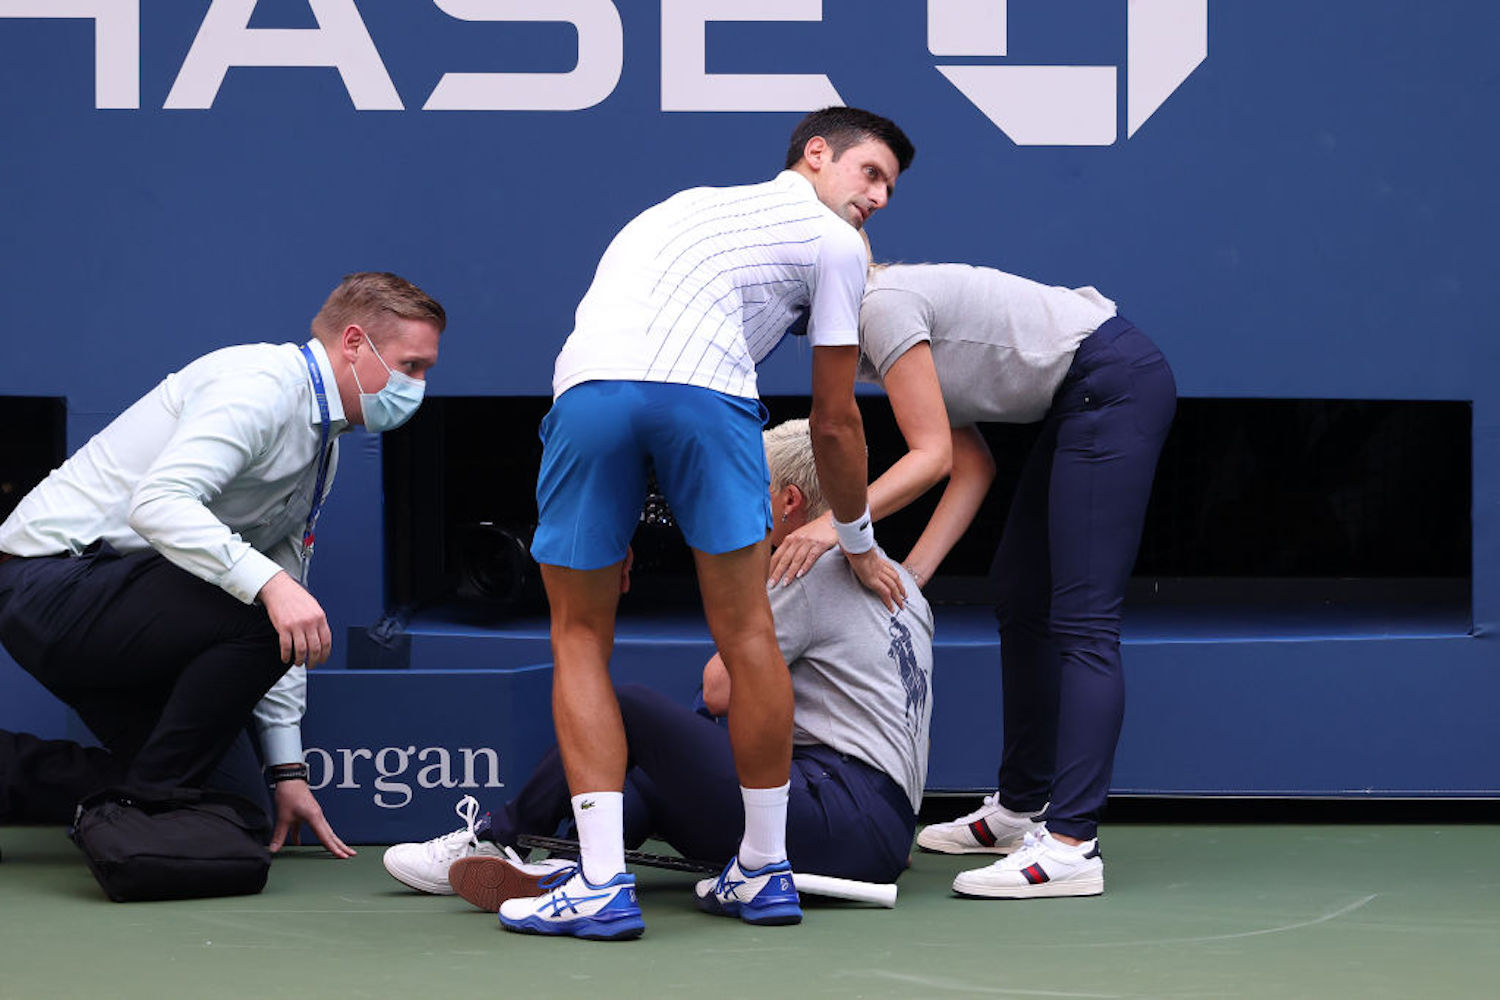 Novak Djokovic's temper tantrum got him kicked out of the U.S. Open, so who takes his place as the new favorite to win the tournament?